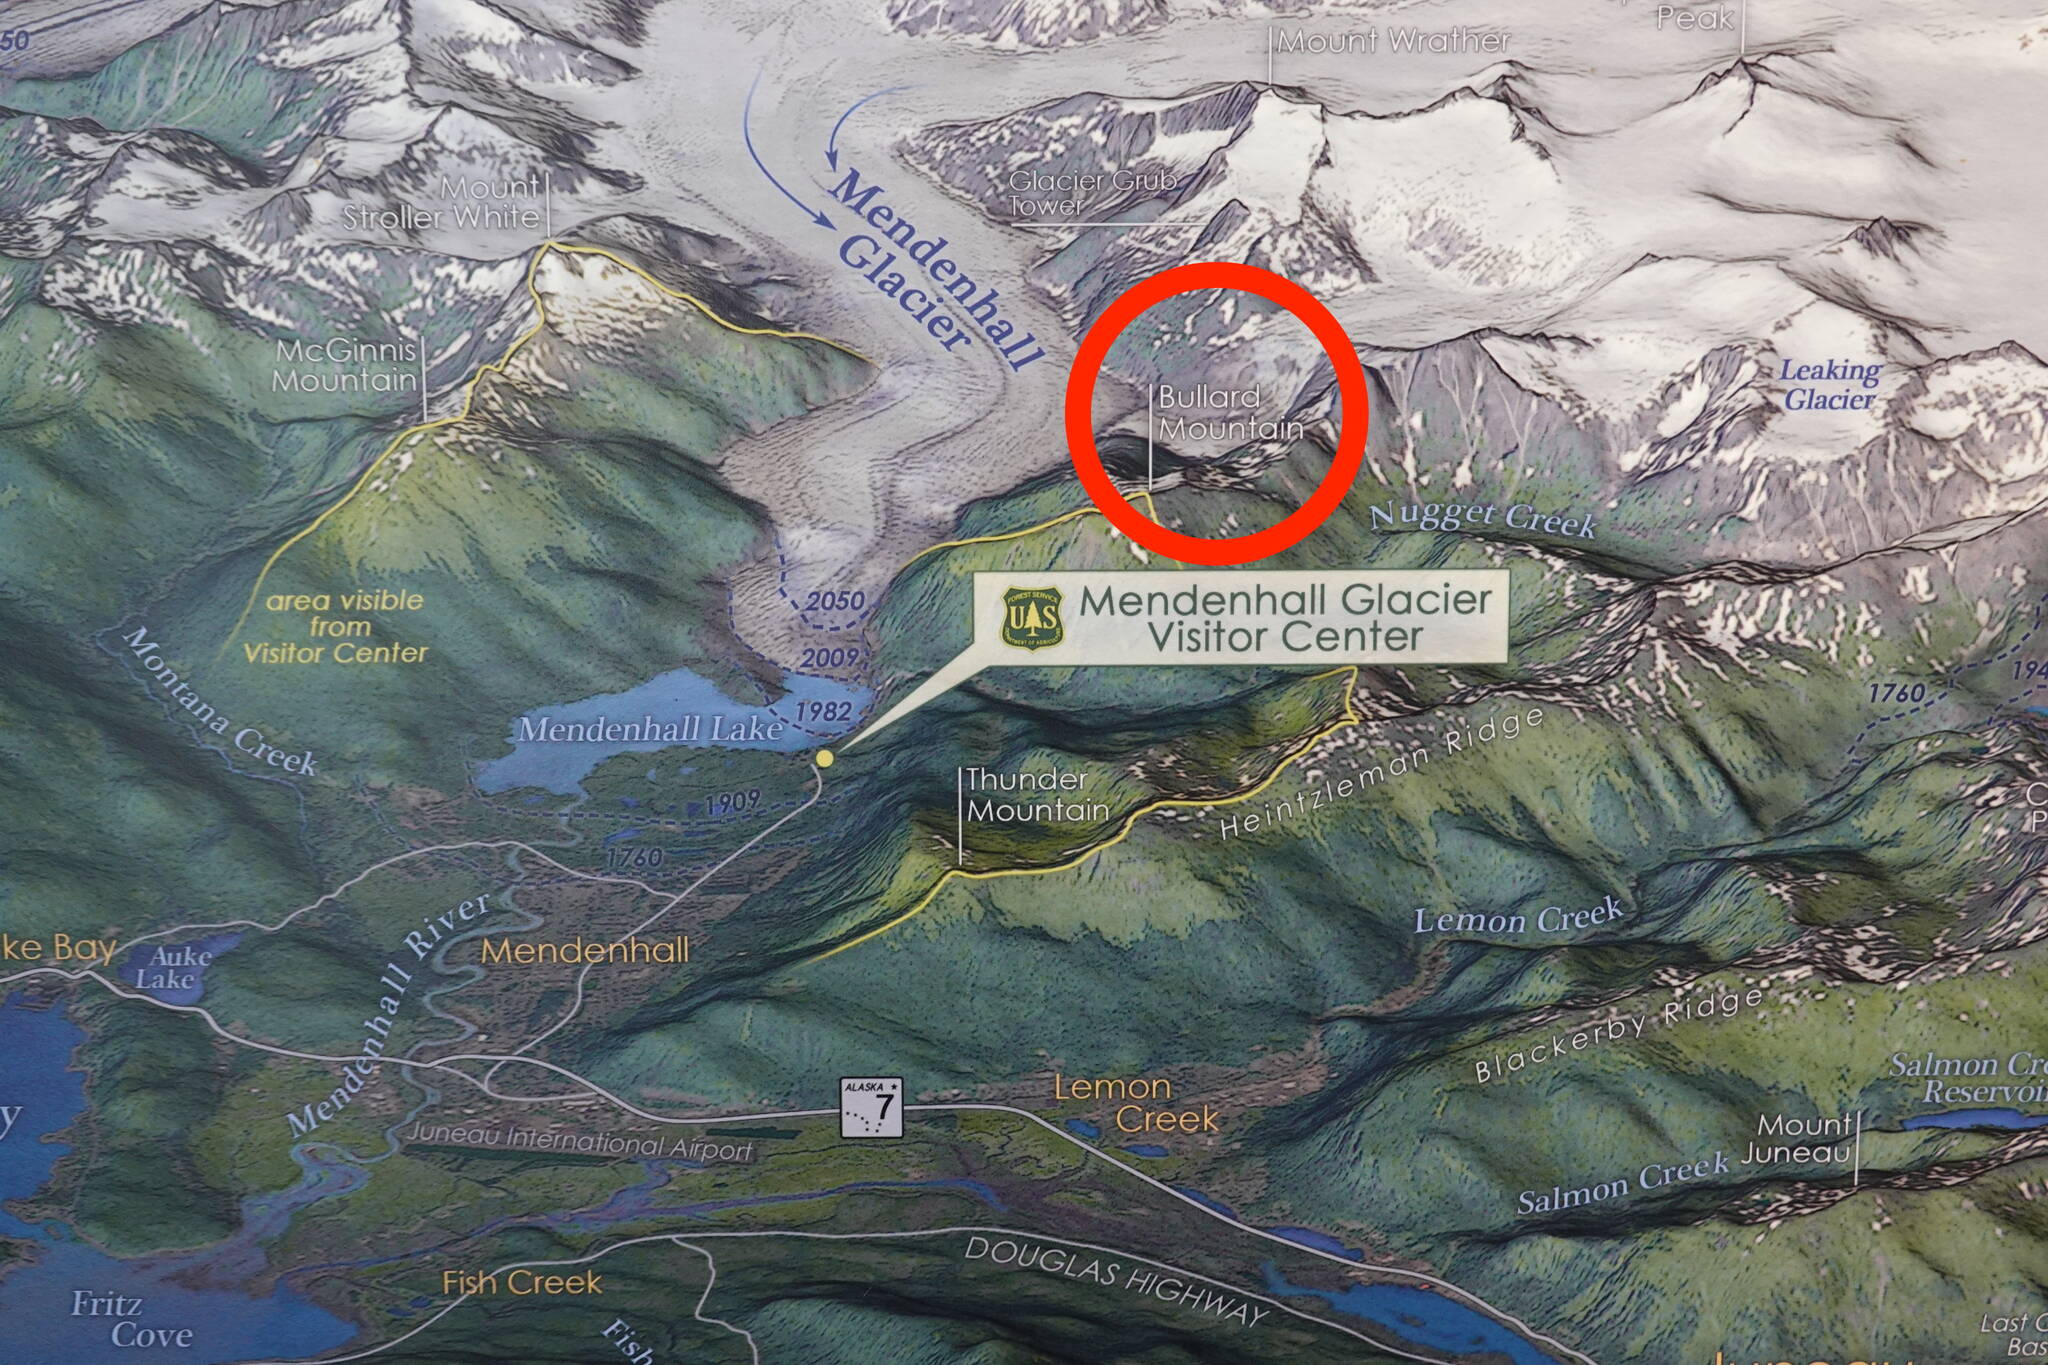 U.S. Forest Service
A large illustrated map by Eric Knight on display in Mendenhall Glacier Visitor Center provides an orientation view of Suicide Basin’s location (red circle). The basin is beneath lettering “Bullard Mountain” and east of Mendenhall Glacier.